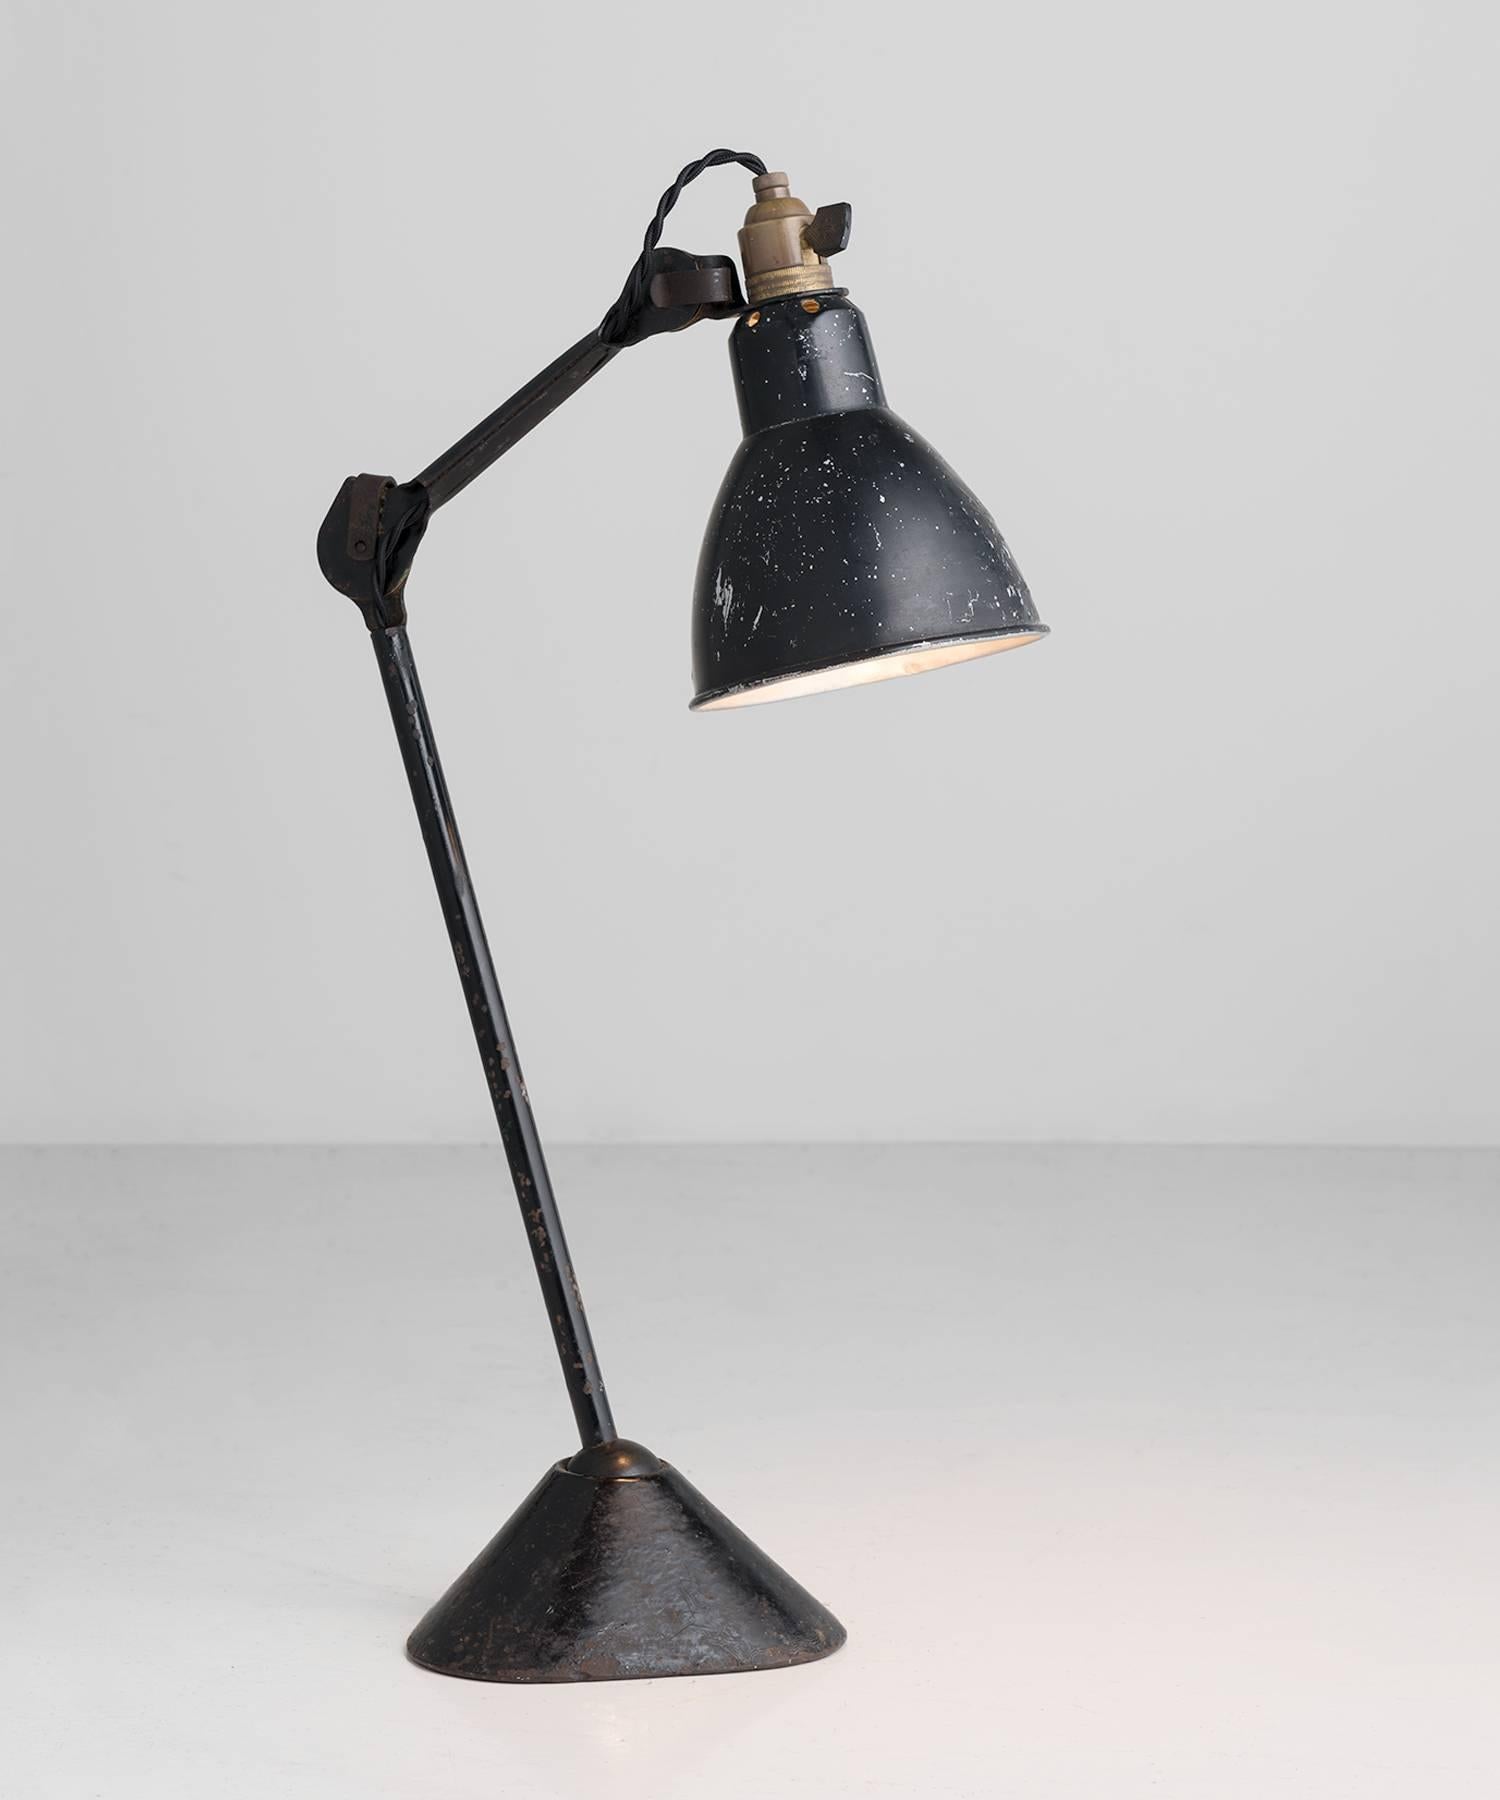 Gras lamp No. 205, circa 1930.

Iconic design by Bernard-Albin Gras features a cast steel frame with three points of adjustment.
